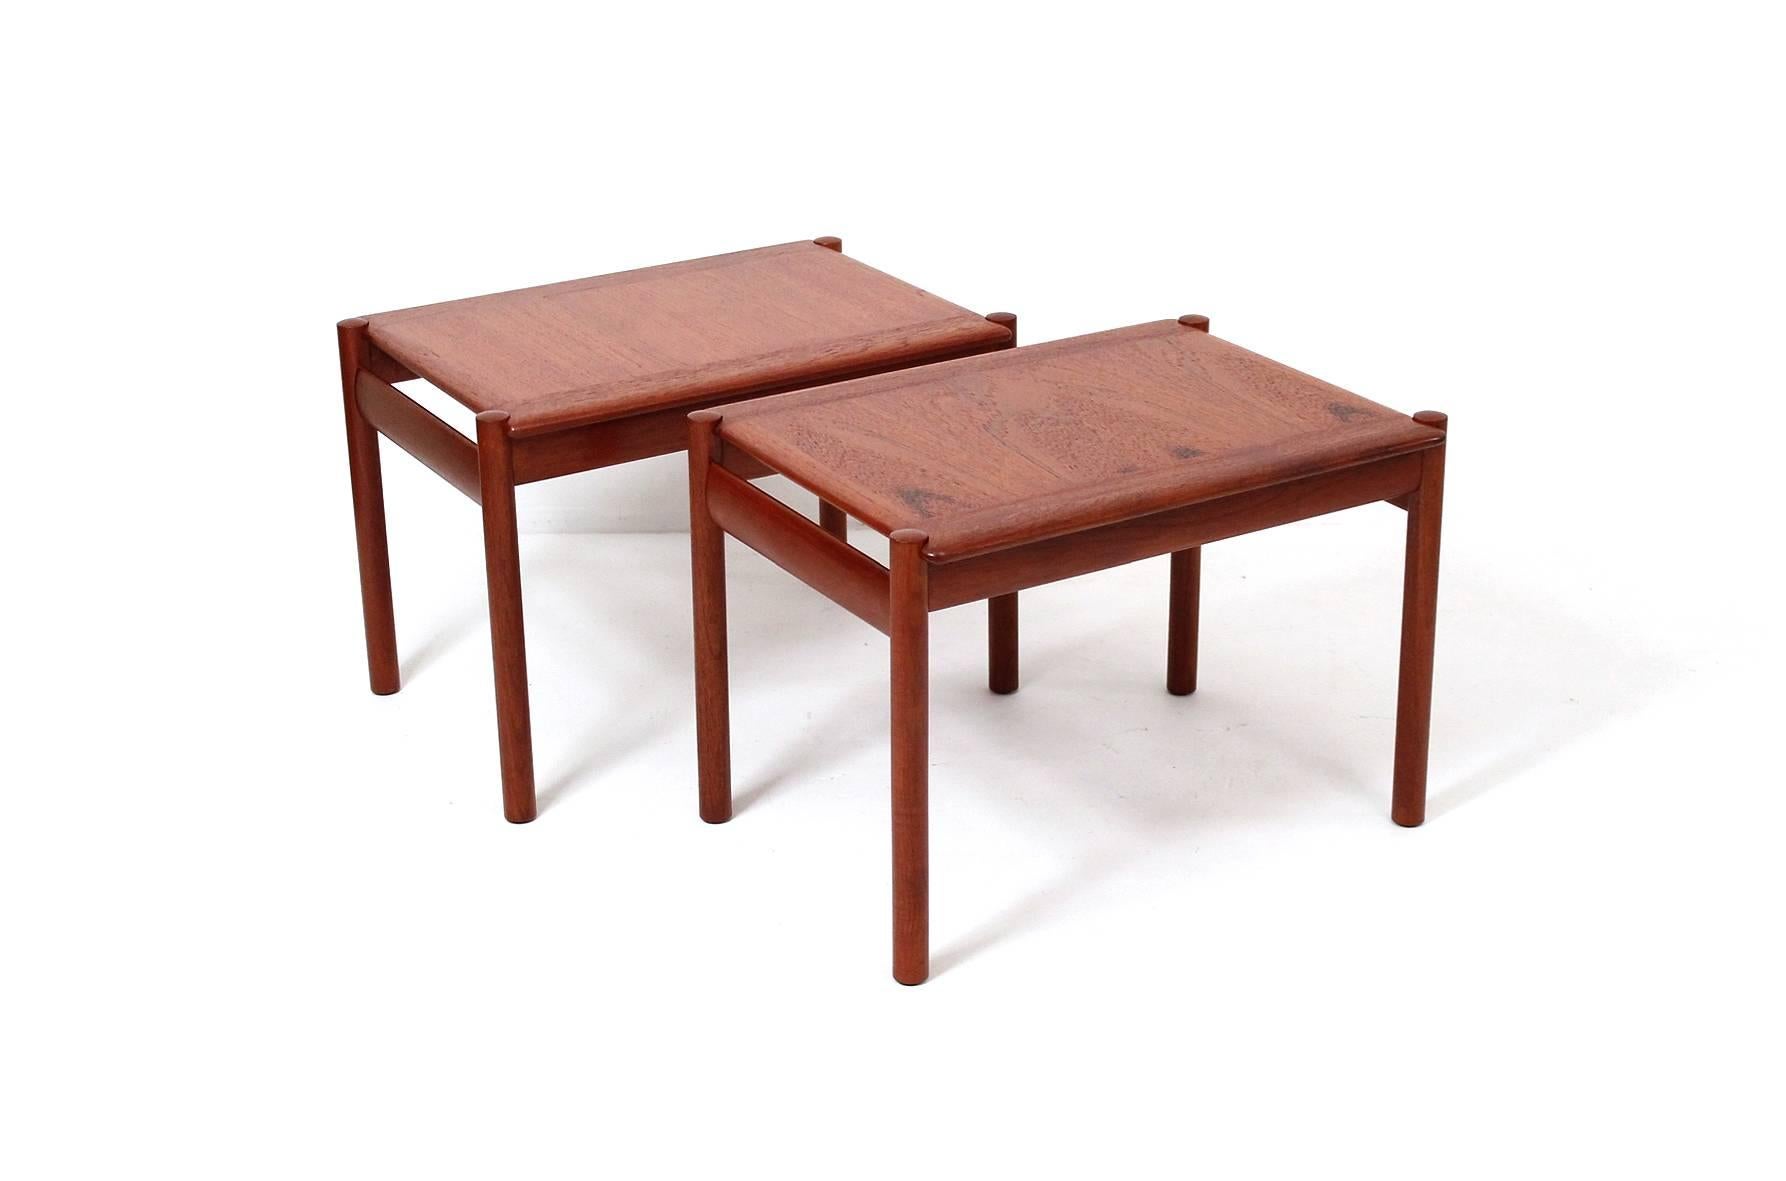 Pair of teak tables designed by Sven Ivar Dysthe for Norwegian firm Dokka. A nicely proportioned set of Scandinavian side tables with interesting details.
 